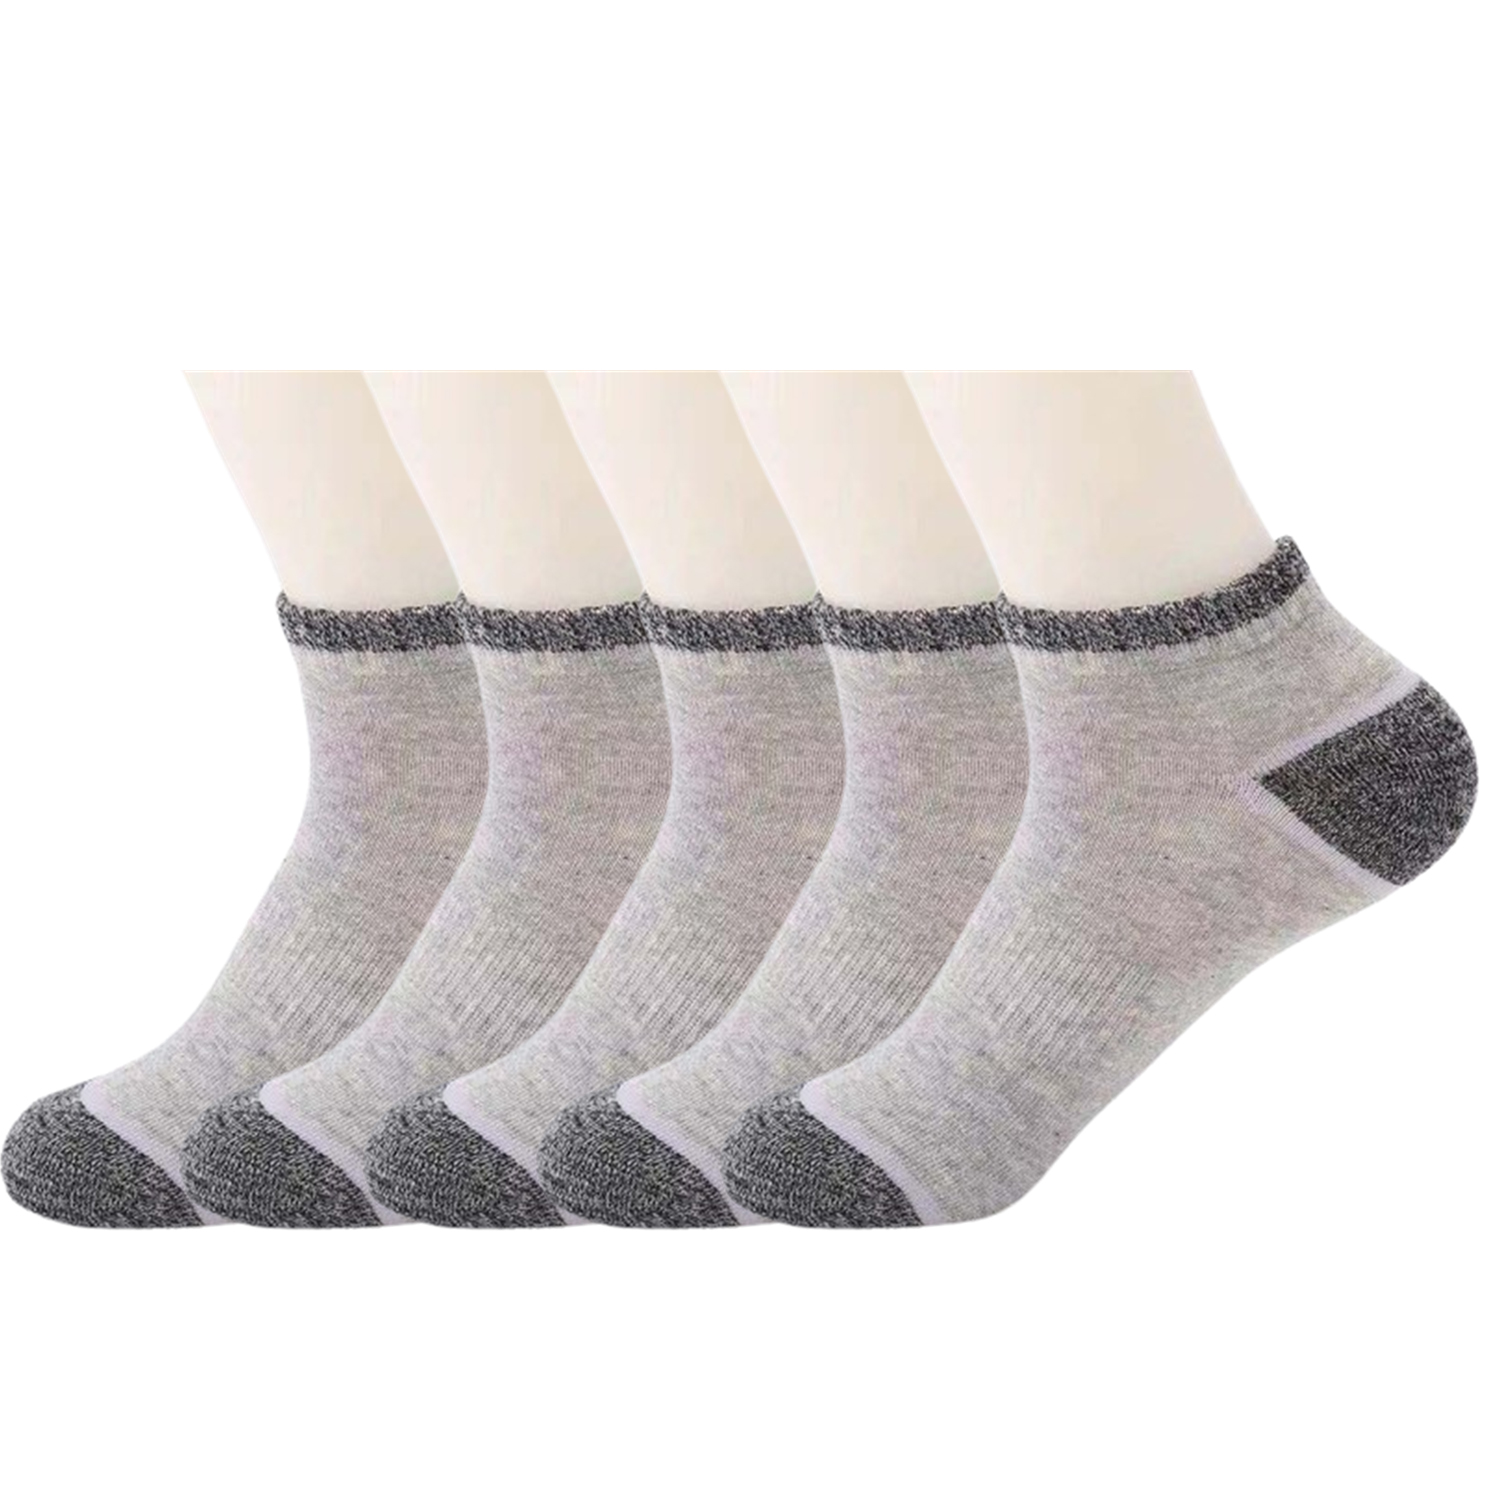 Mens Athletic Ankle Socks Running Low Cut 5 Pairs Cotton Cushioned ...